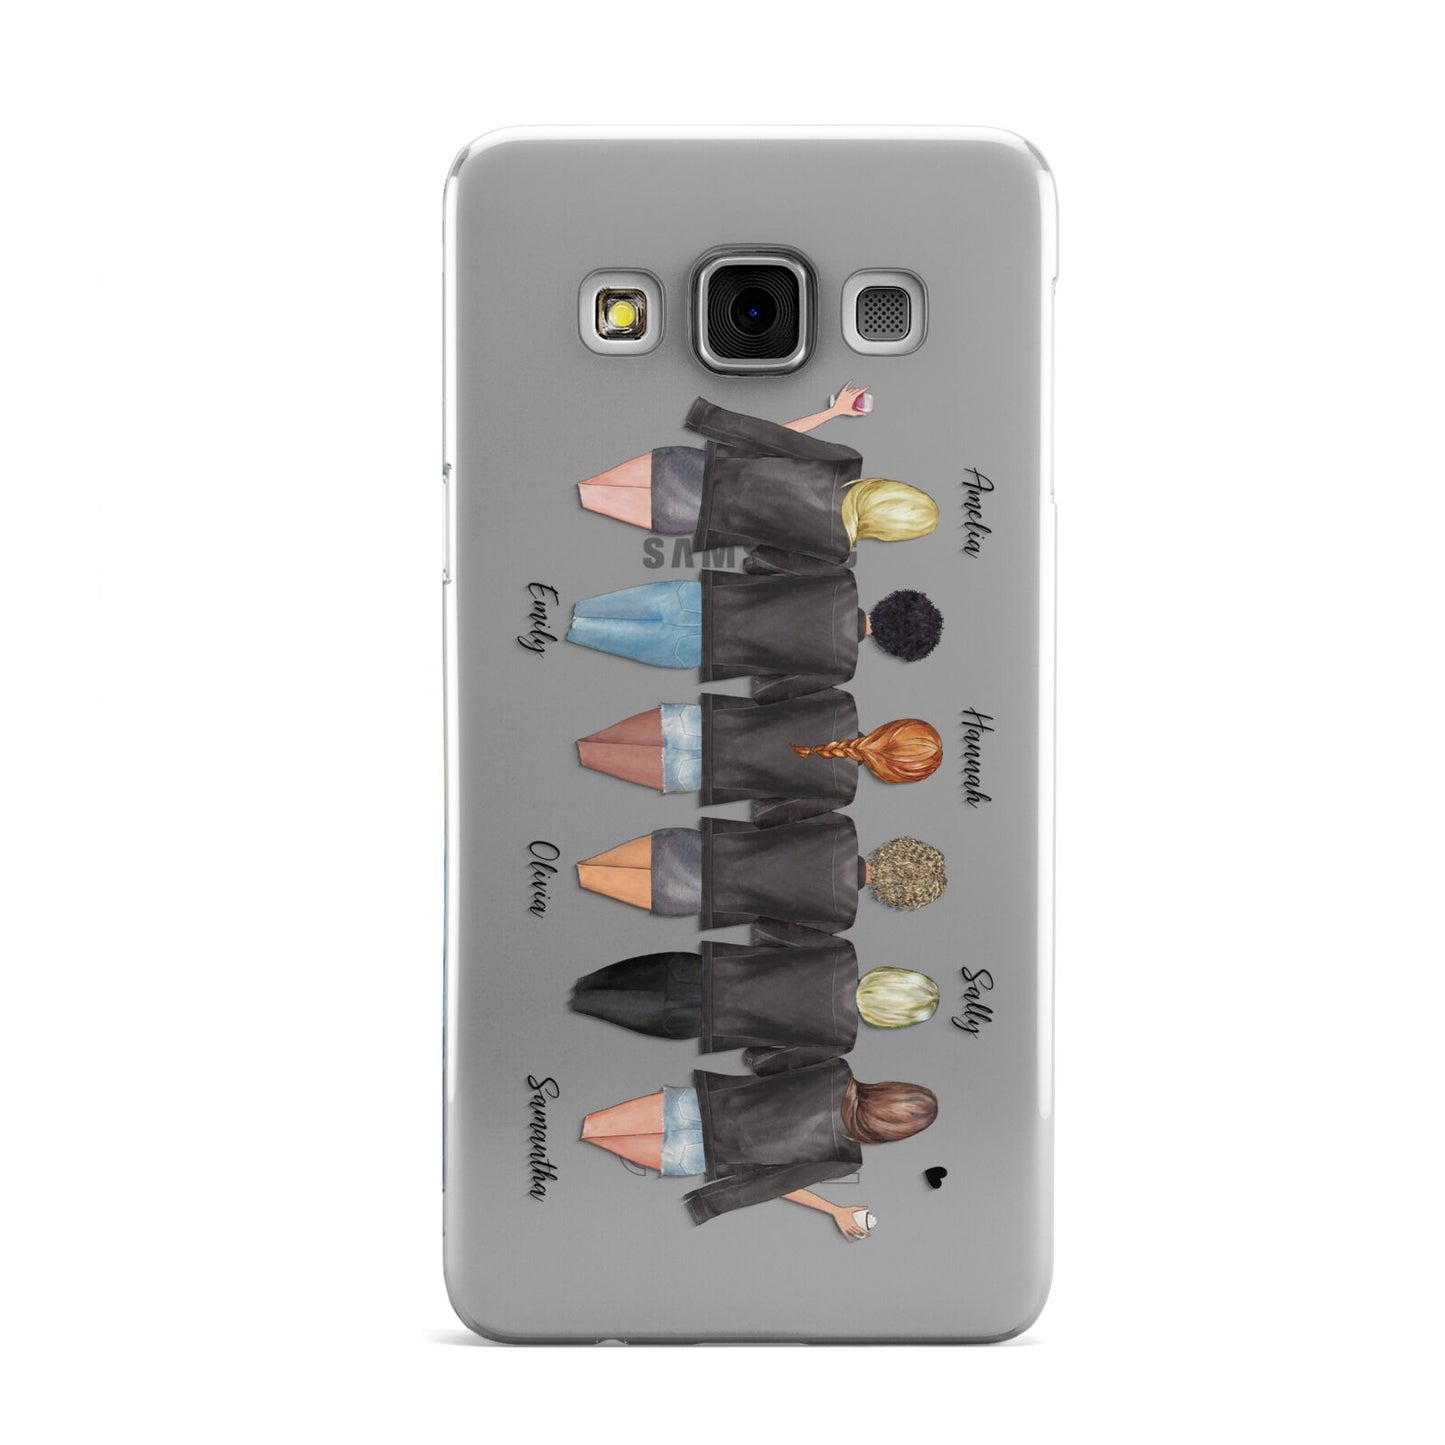 6 Best Friends with Names Samsung Galaxy A3 Case